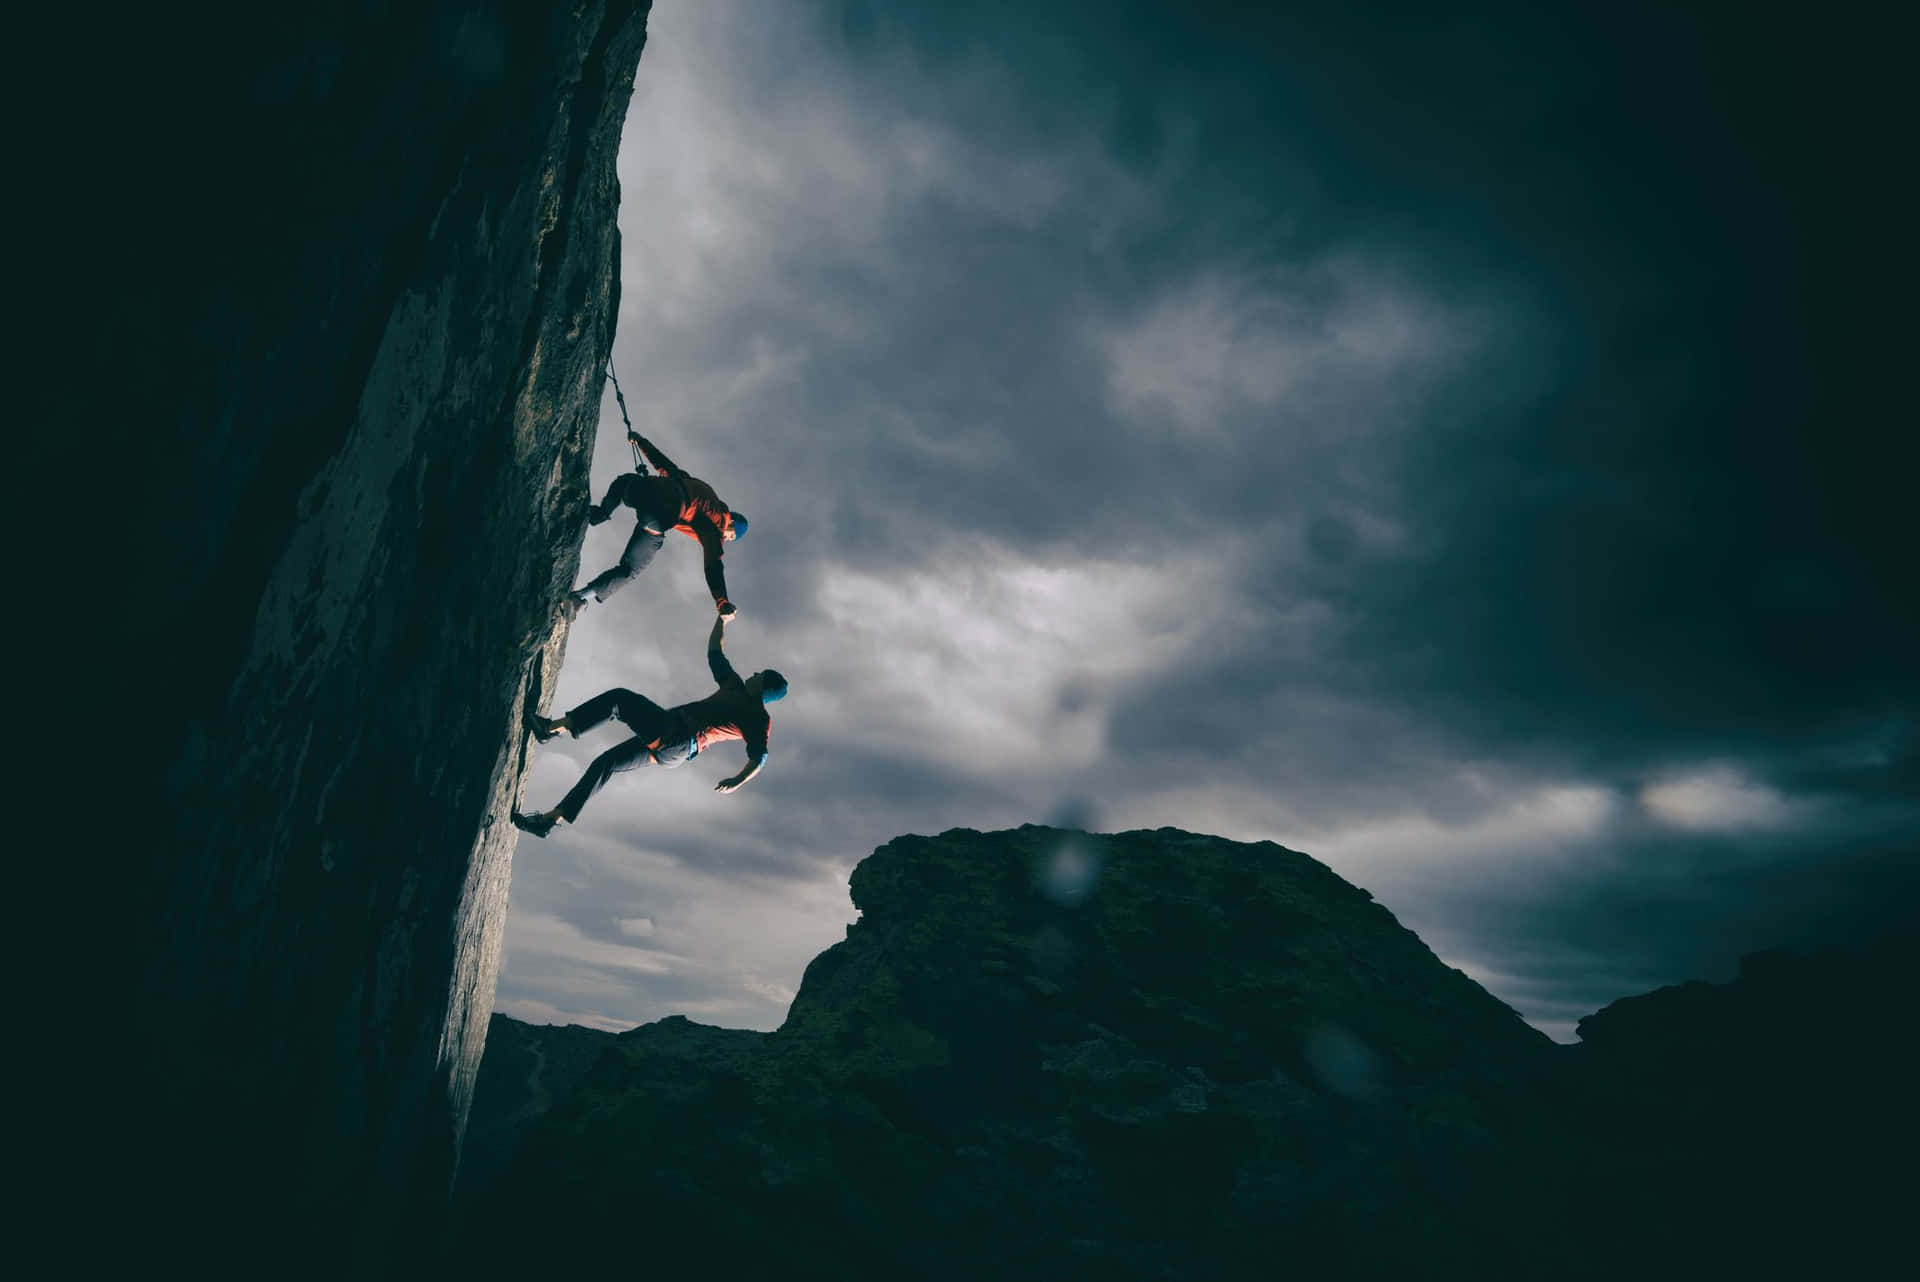 Two People Climbing A Mountain In The Dark